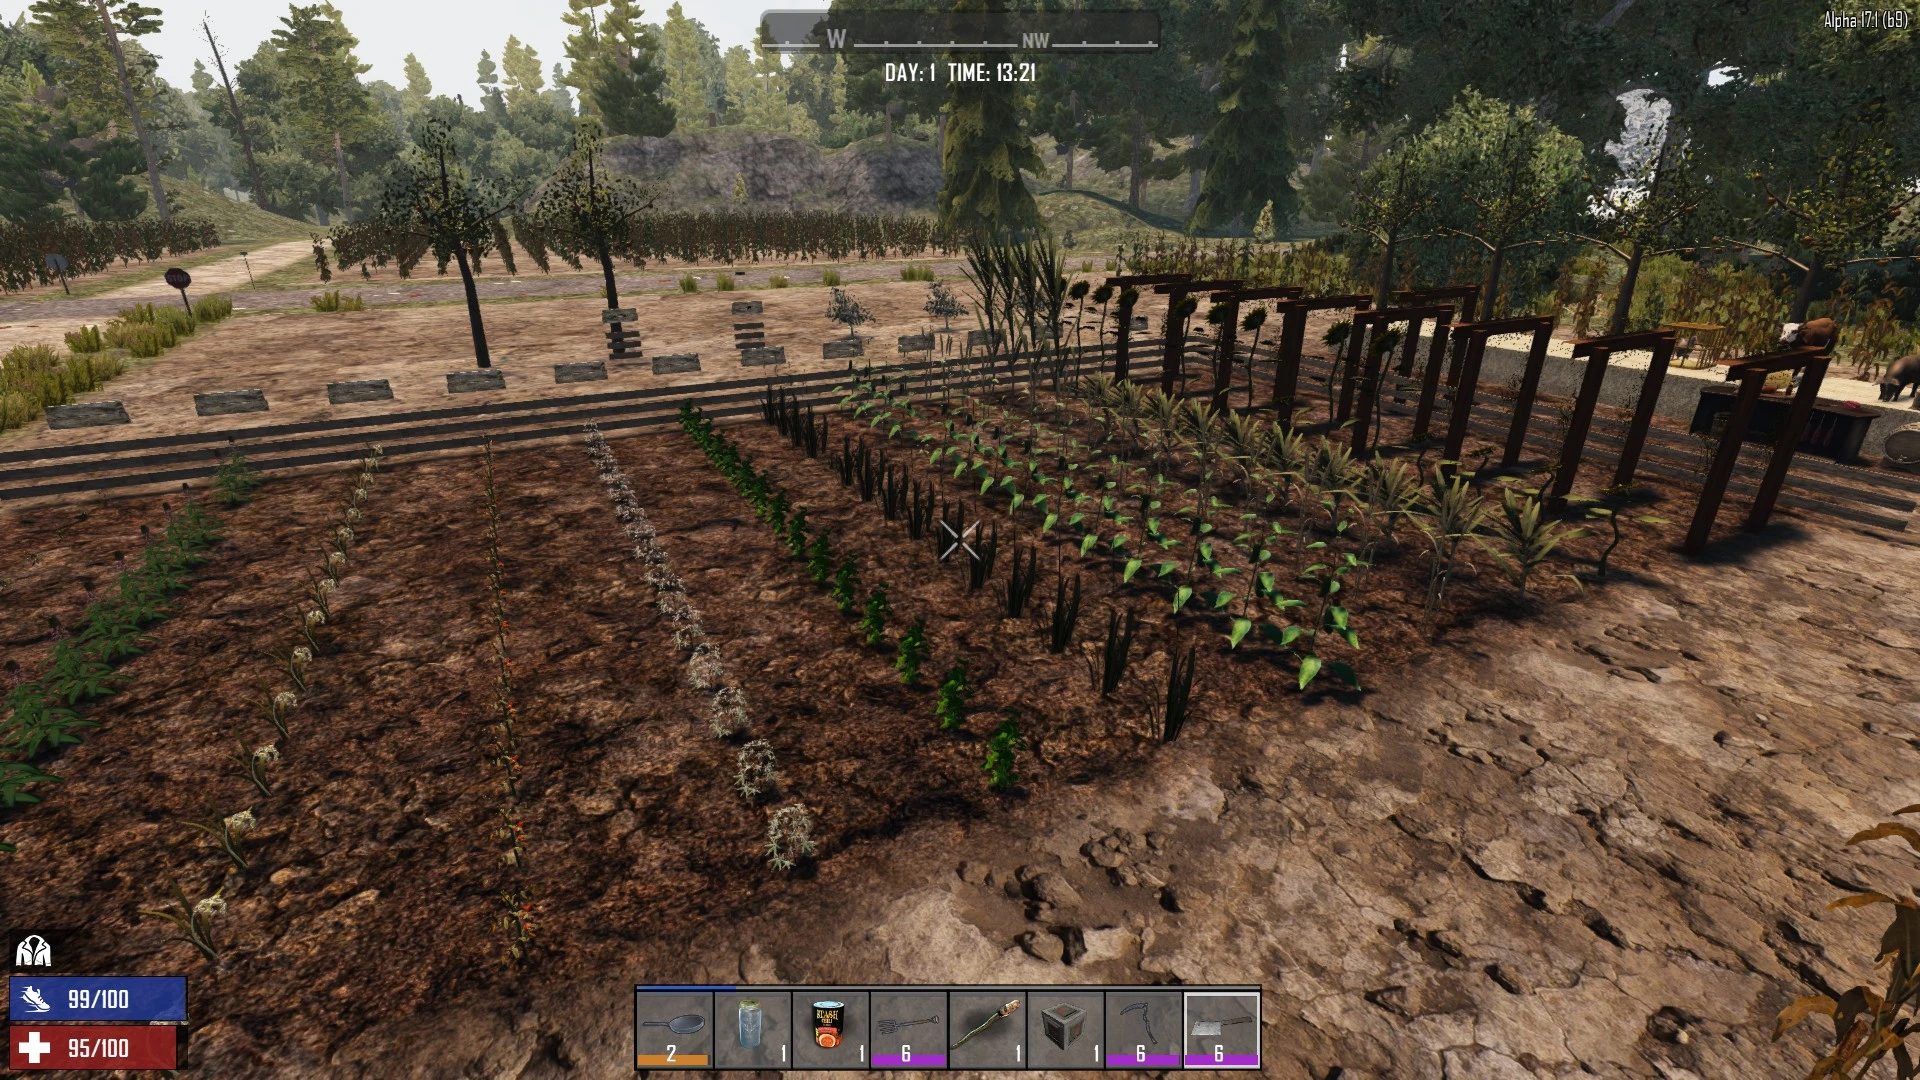 7 days to die farming without hoe